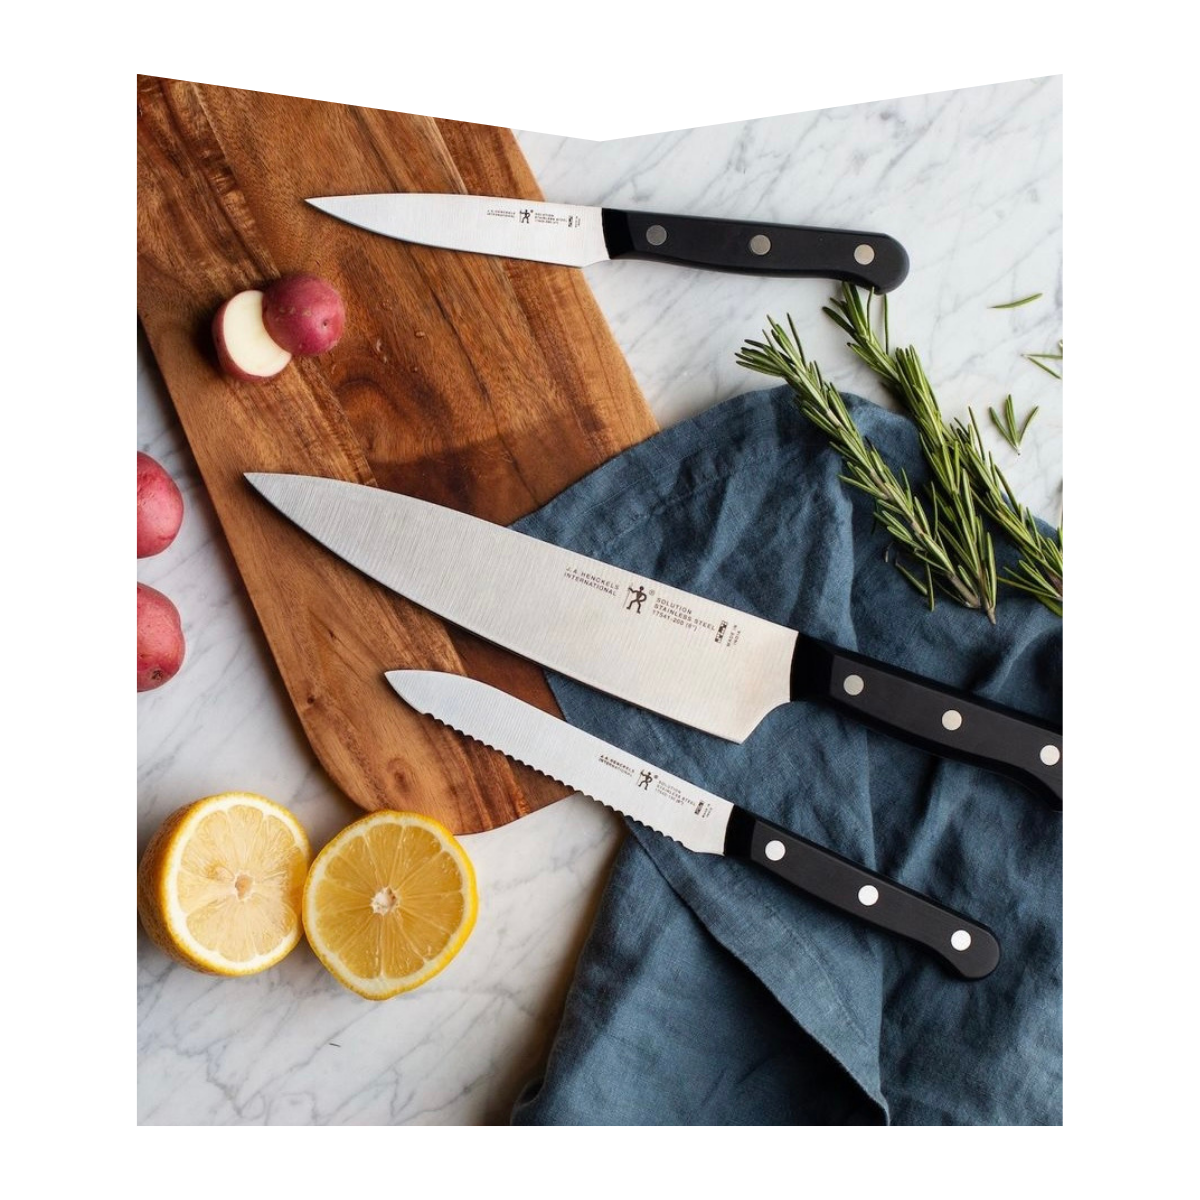 Set of Knives from Hudson's Bay